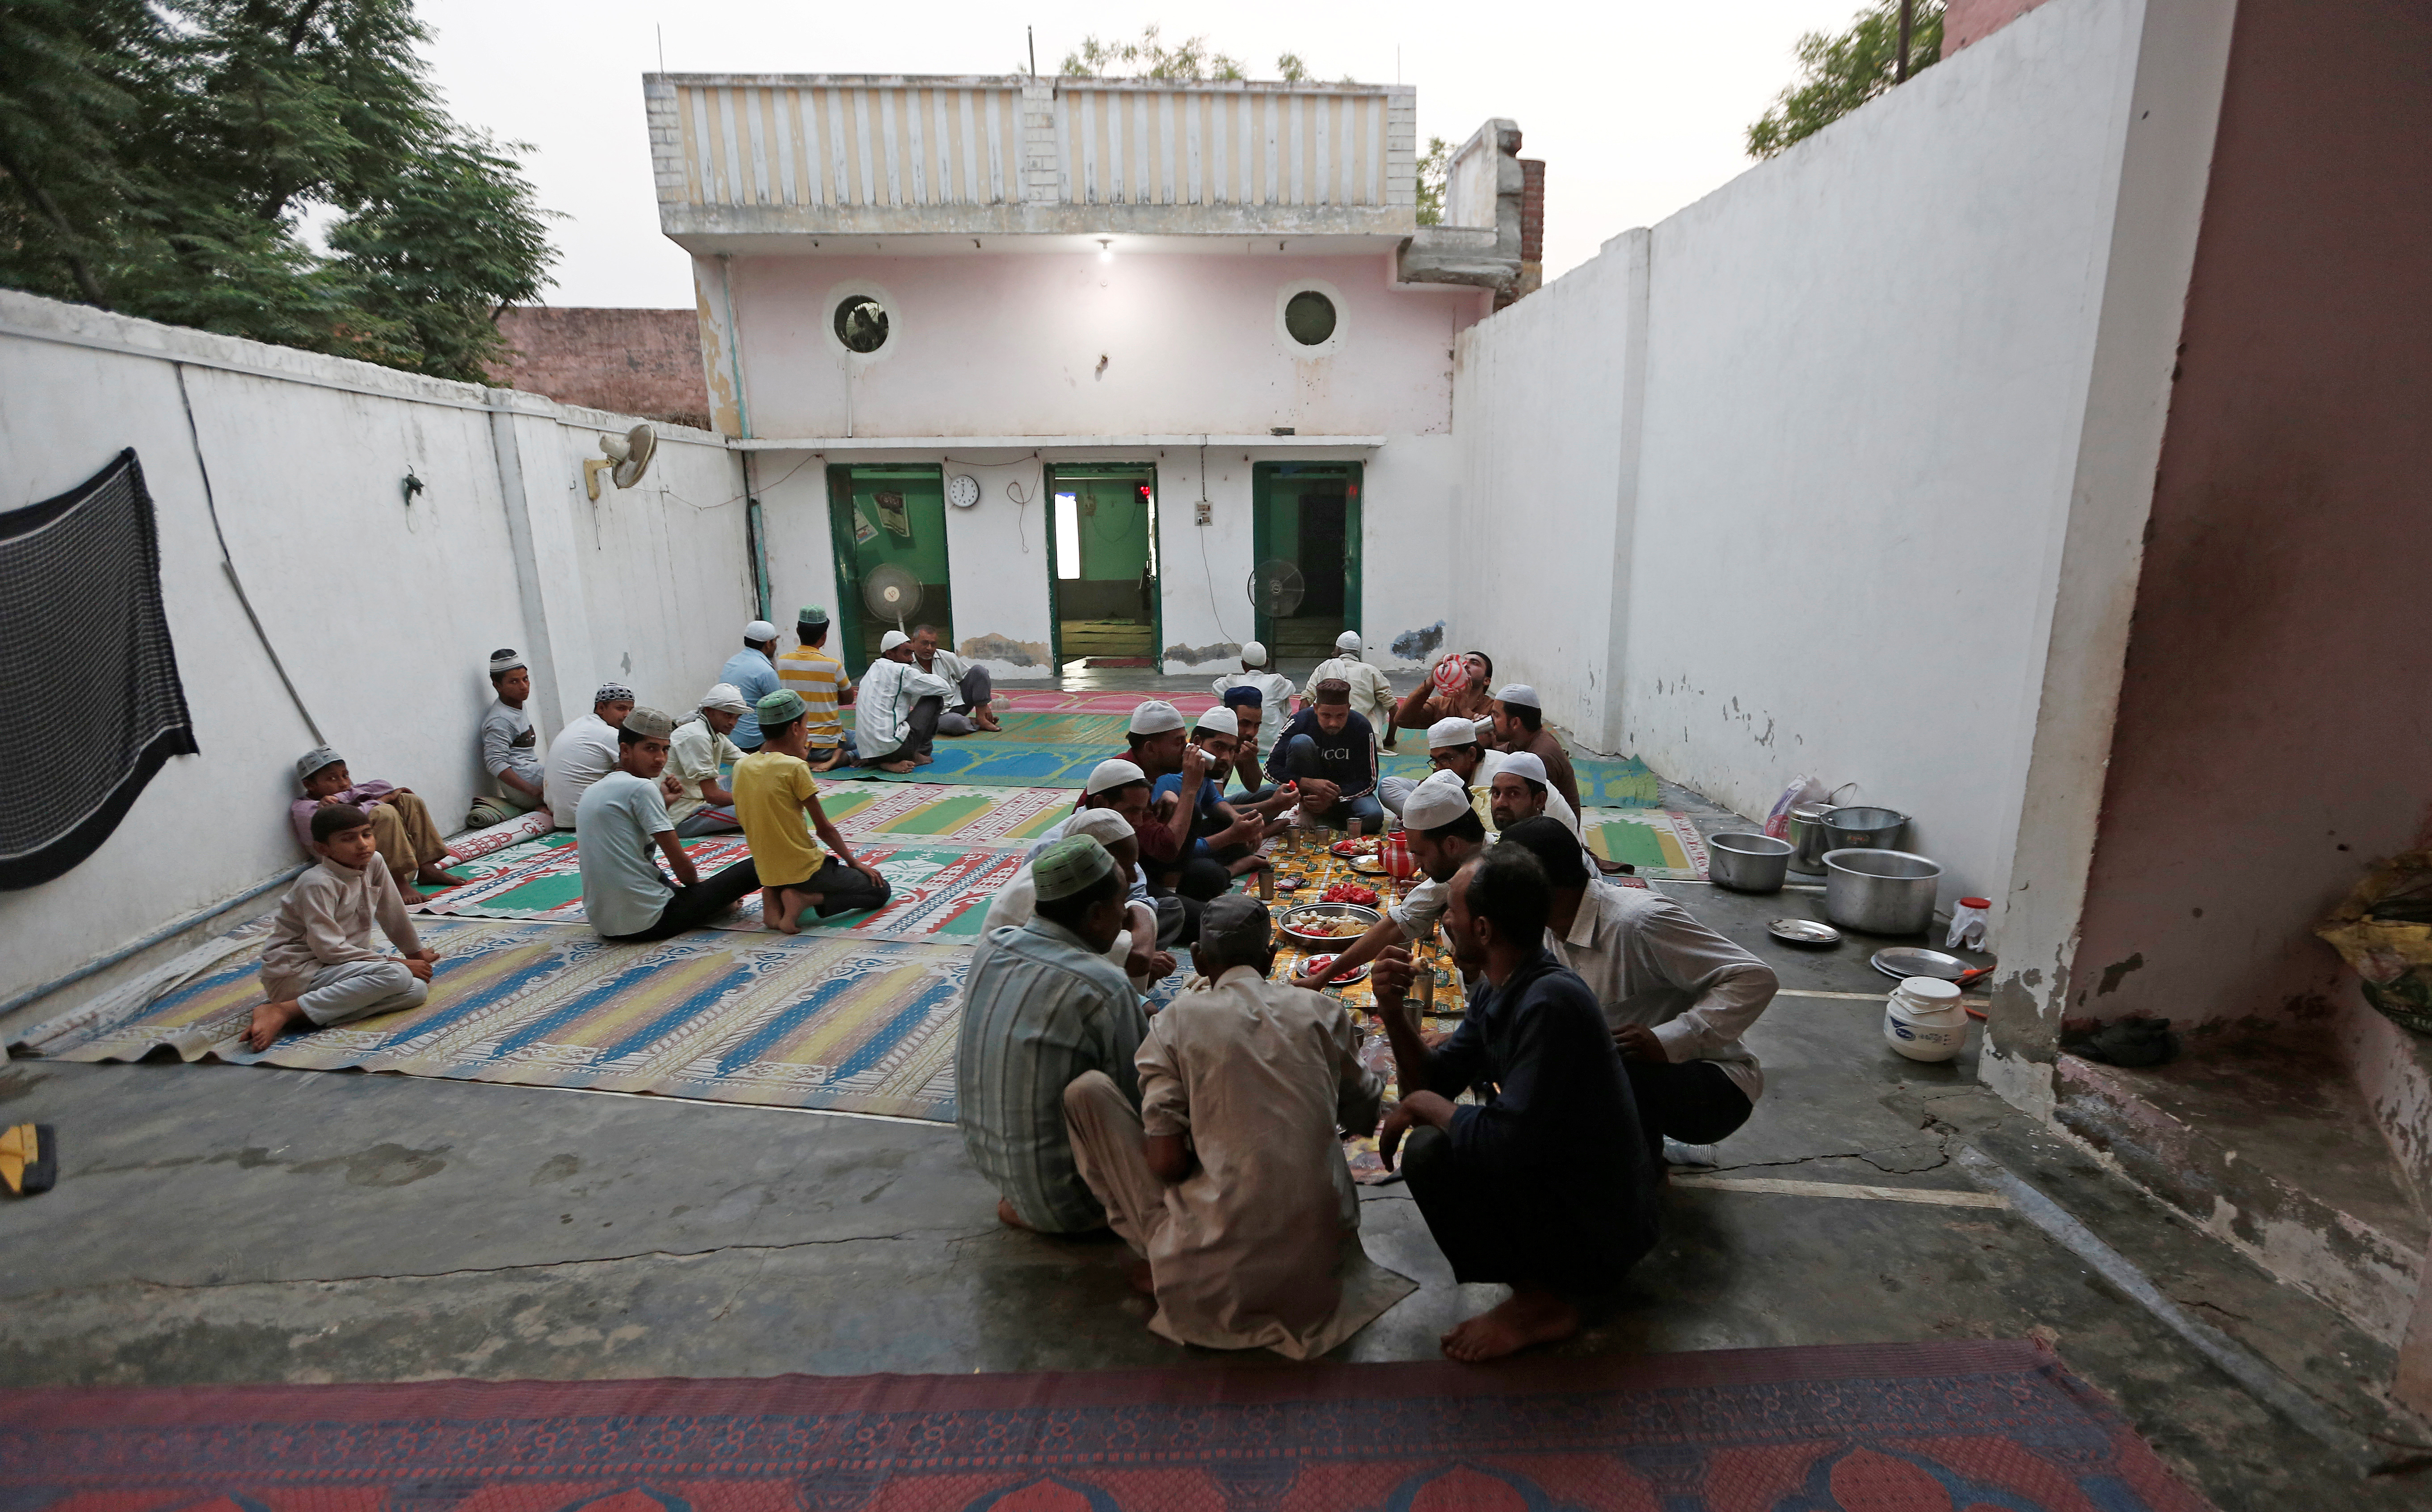 Muslims eat their Iftar (breaking of fast) meal during the holy month of Ramadan inside a madrasa that also acts as a mosque in village Nayabans